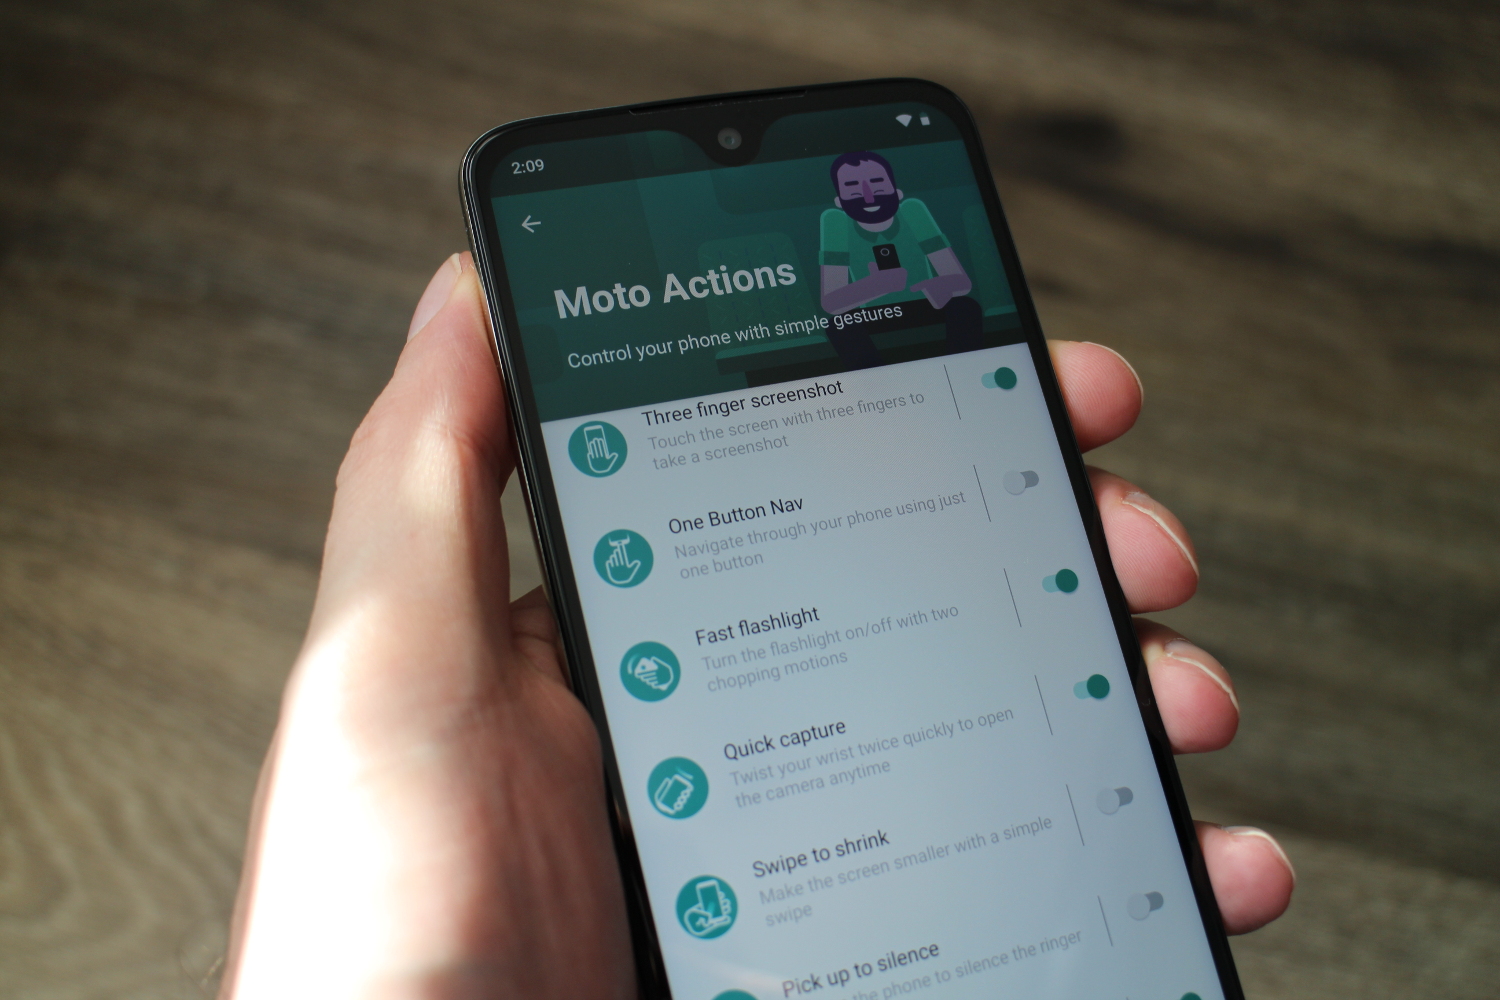 Key settings to change on your Moto G7